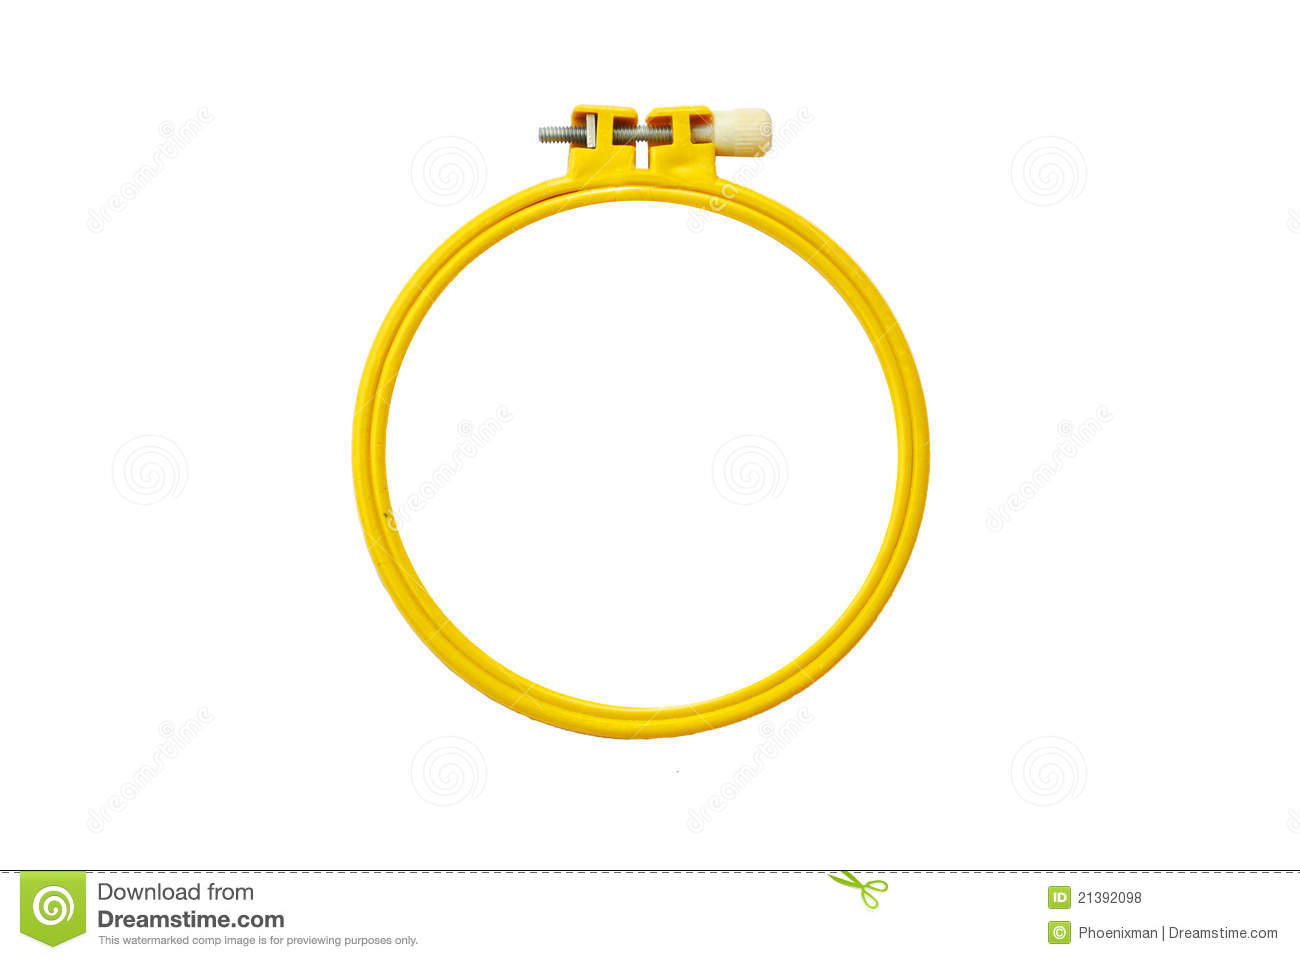 Embroidery Hoop Royalty Free Stock Photos   Image  21392098